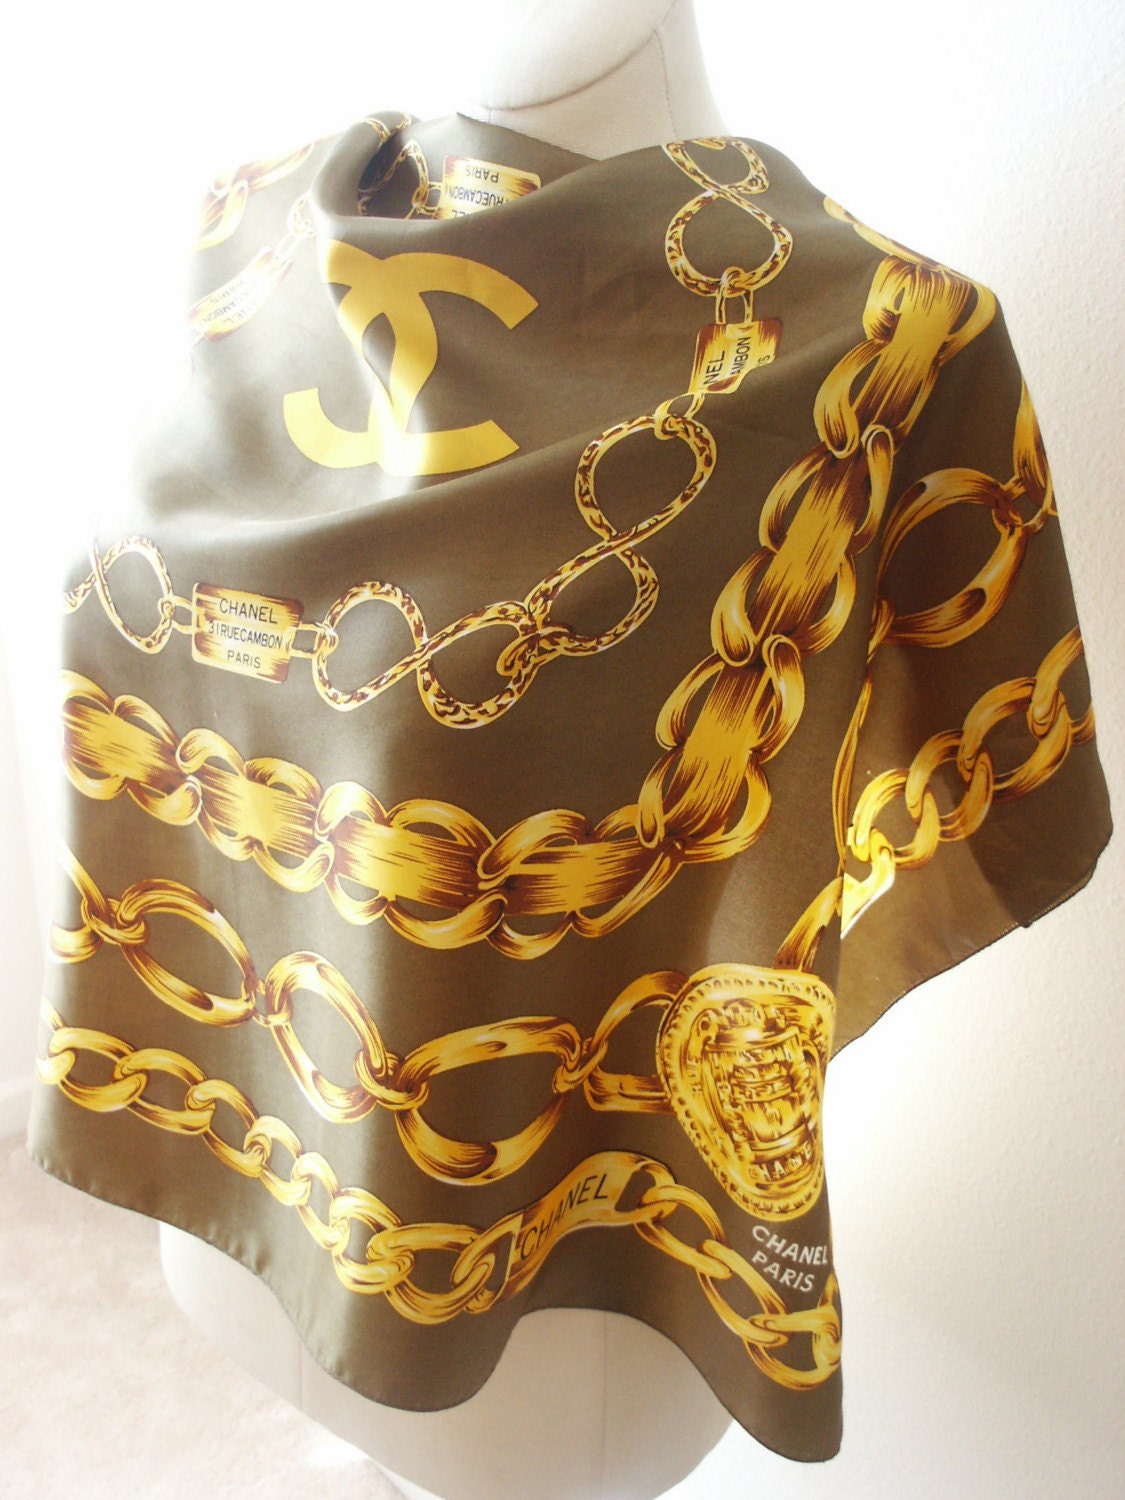 Beautiful Vintage Chanel Logo Scarf 31 Rue Cambon by eagerhands